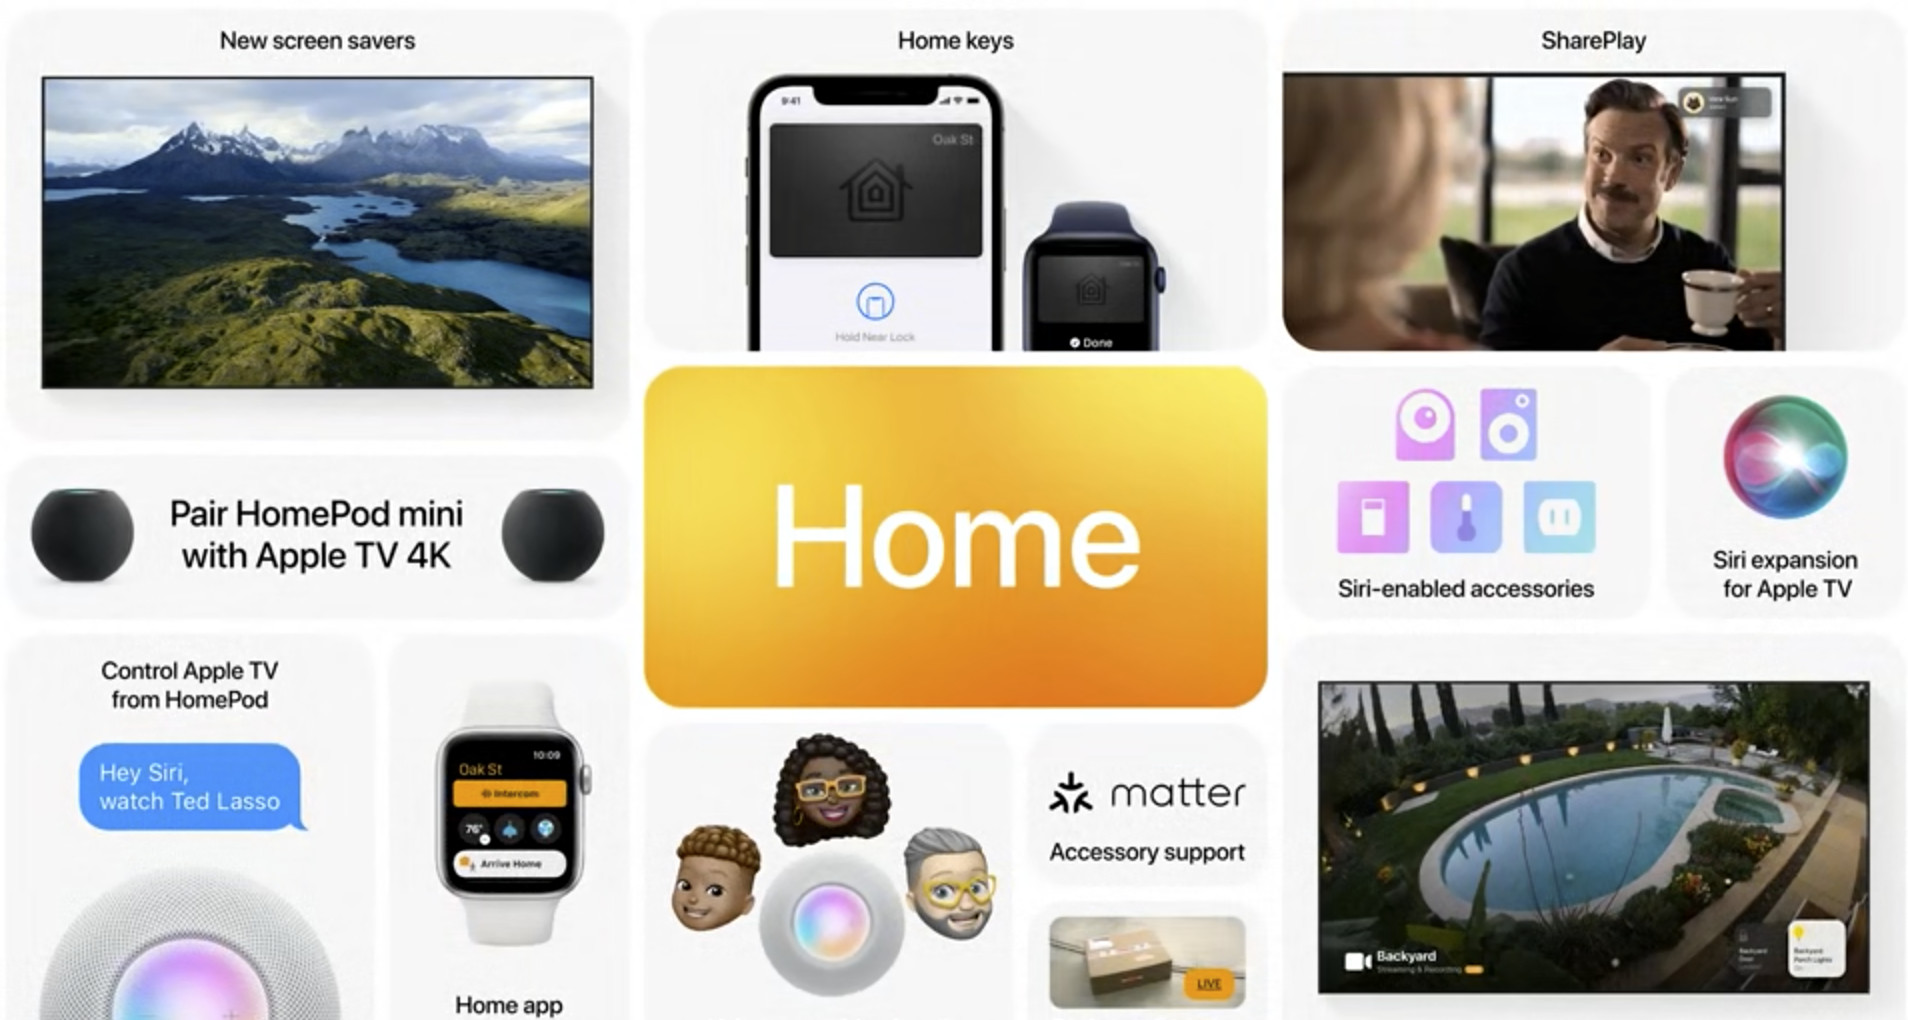 Developing apps and accessories for the home - Apple Developer